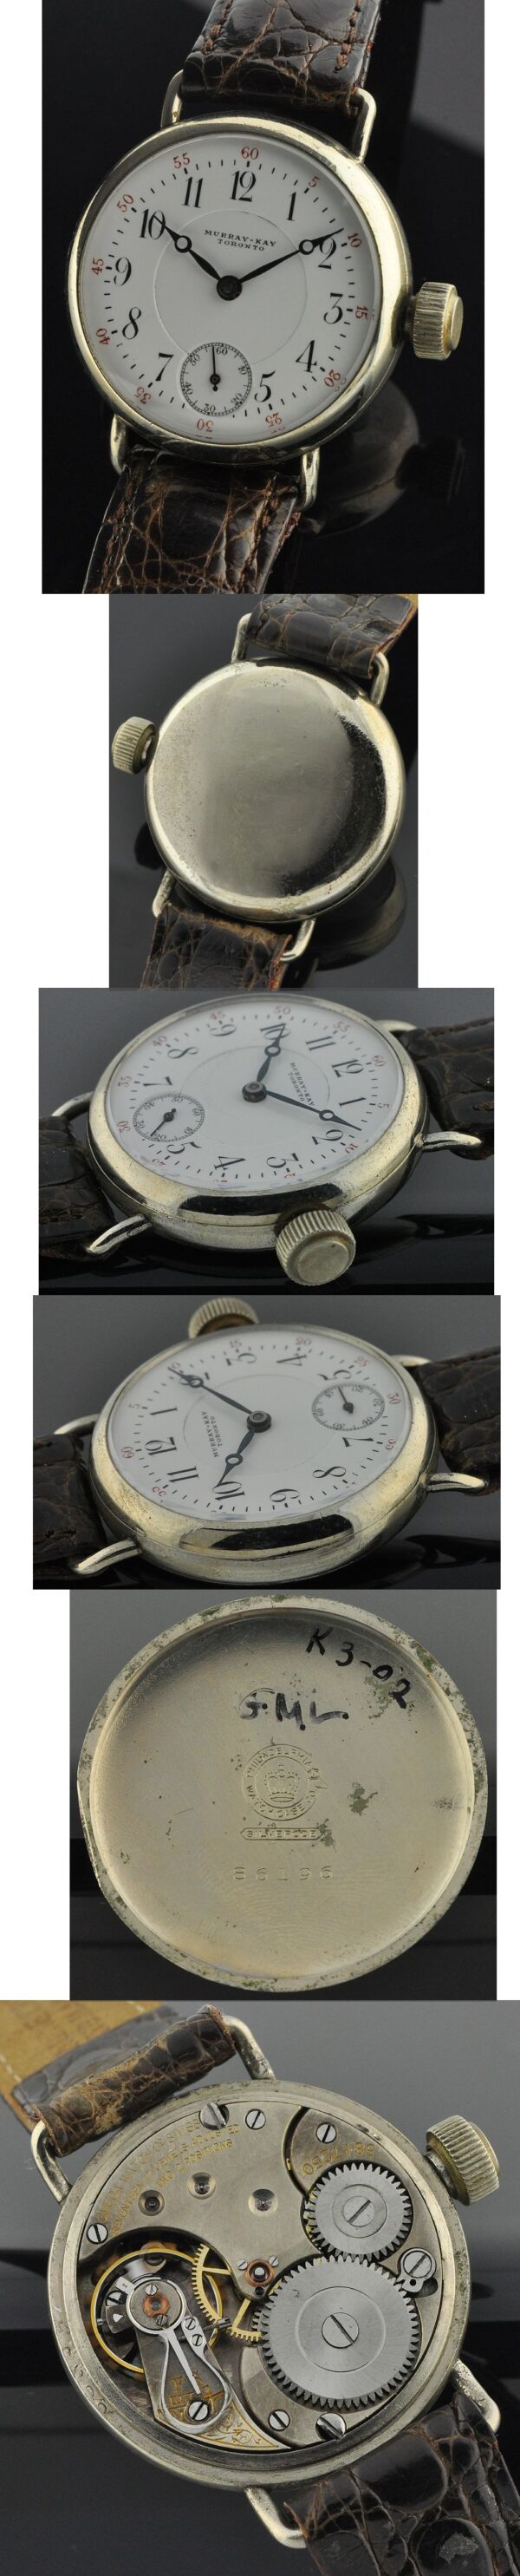 1920s Murray Kay Toronto silveroid watch with original case, large winding crown, enamel dial, sub-seconds, and manual winding movement.